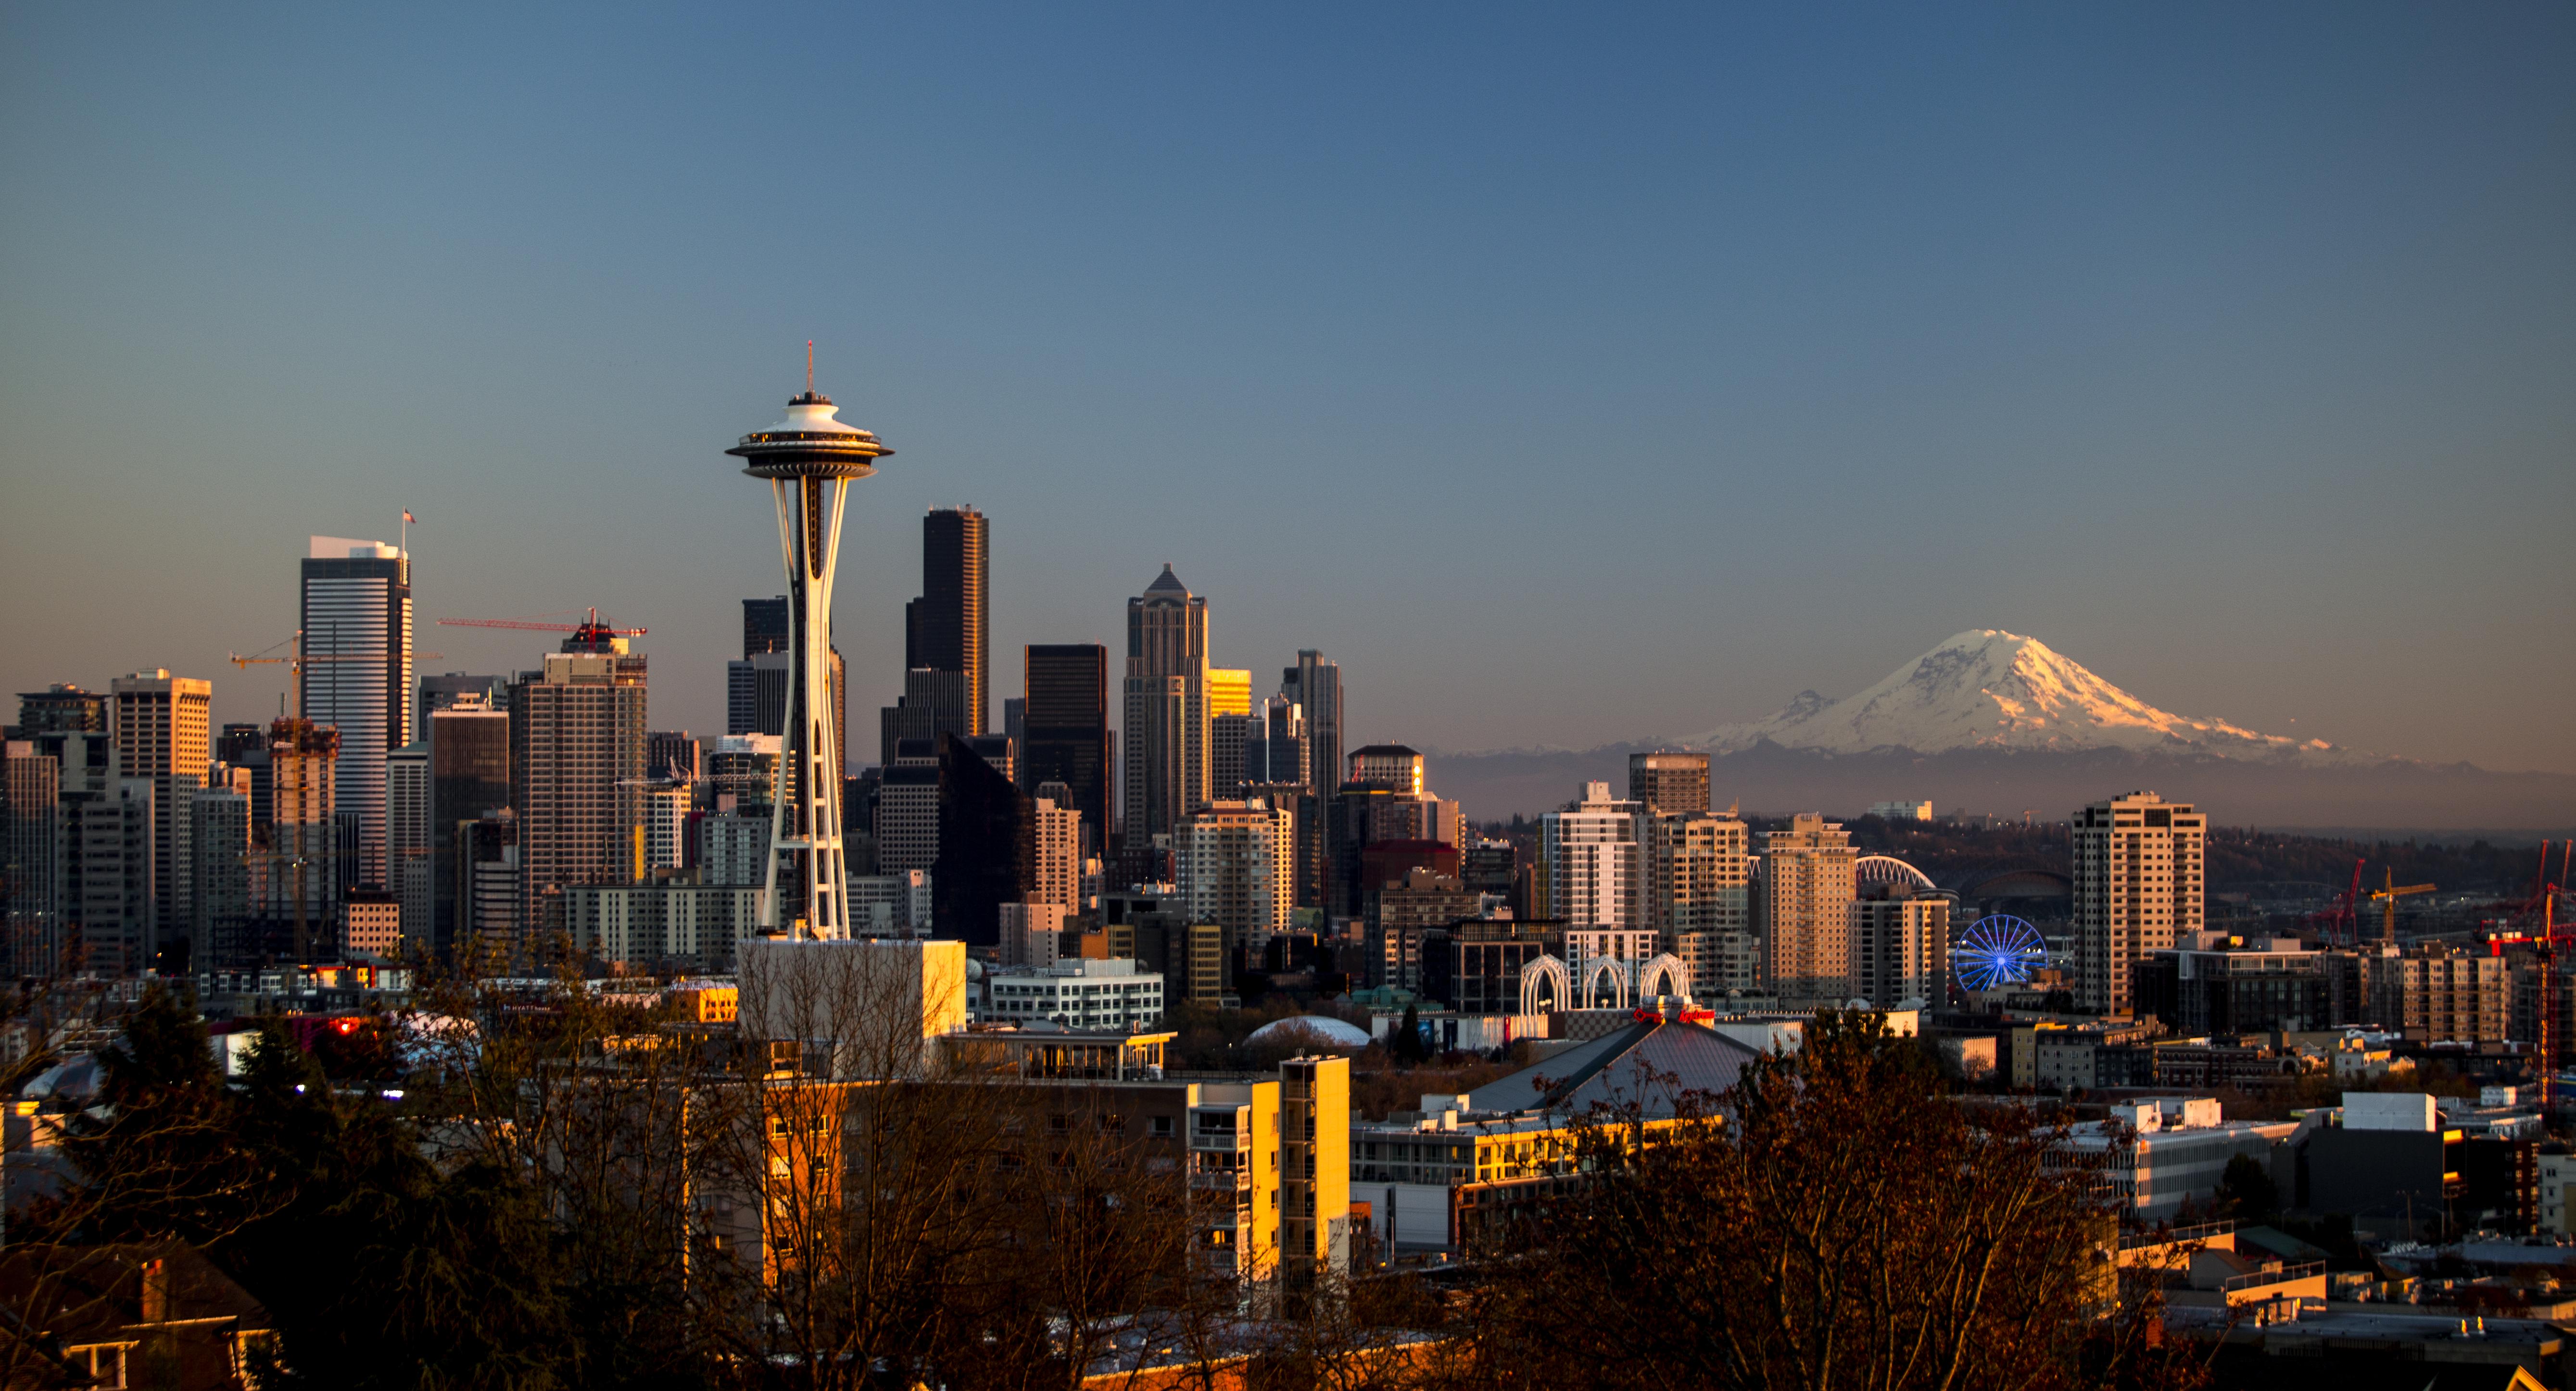 Skyline view of Seattle with Mt. Rainier in the distance.